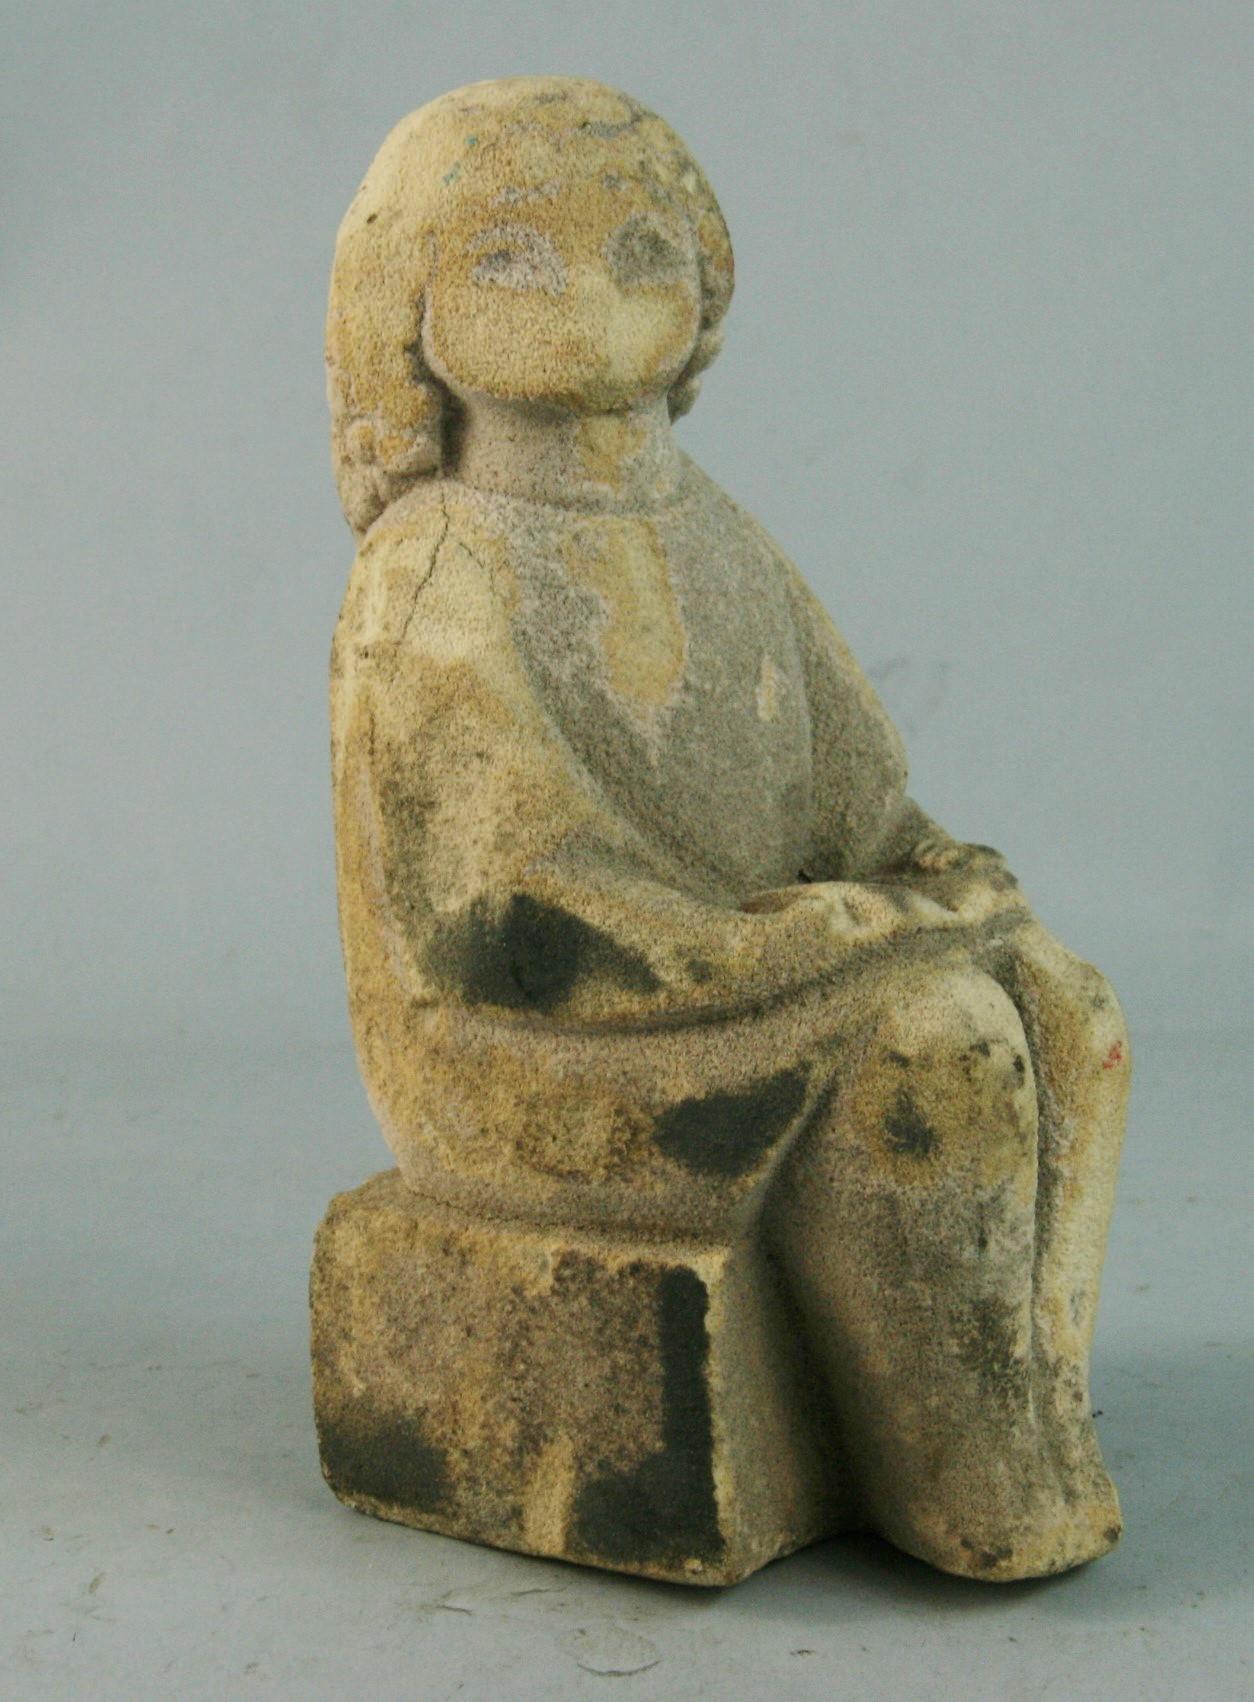 3-767 Limestone female sculpture with makers mark on bottom.